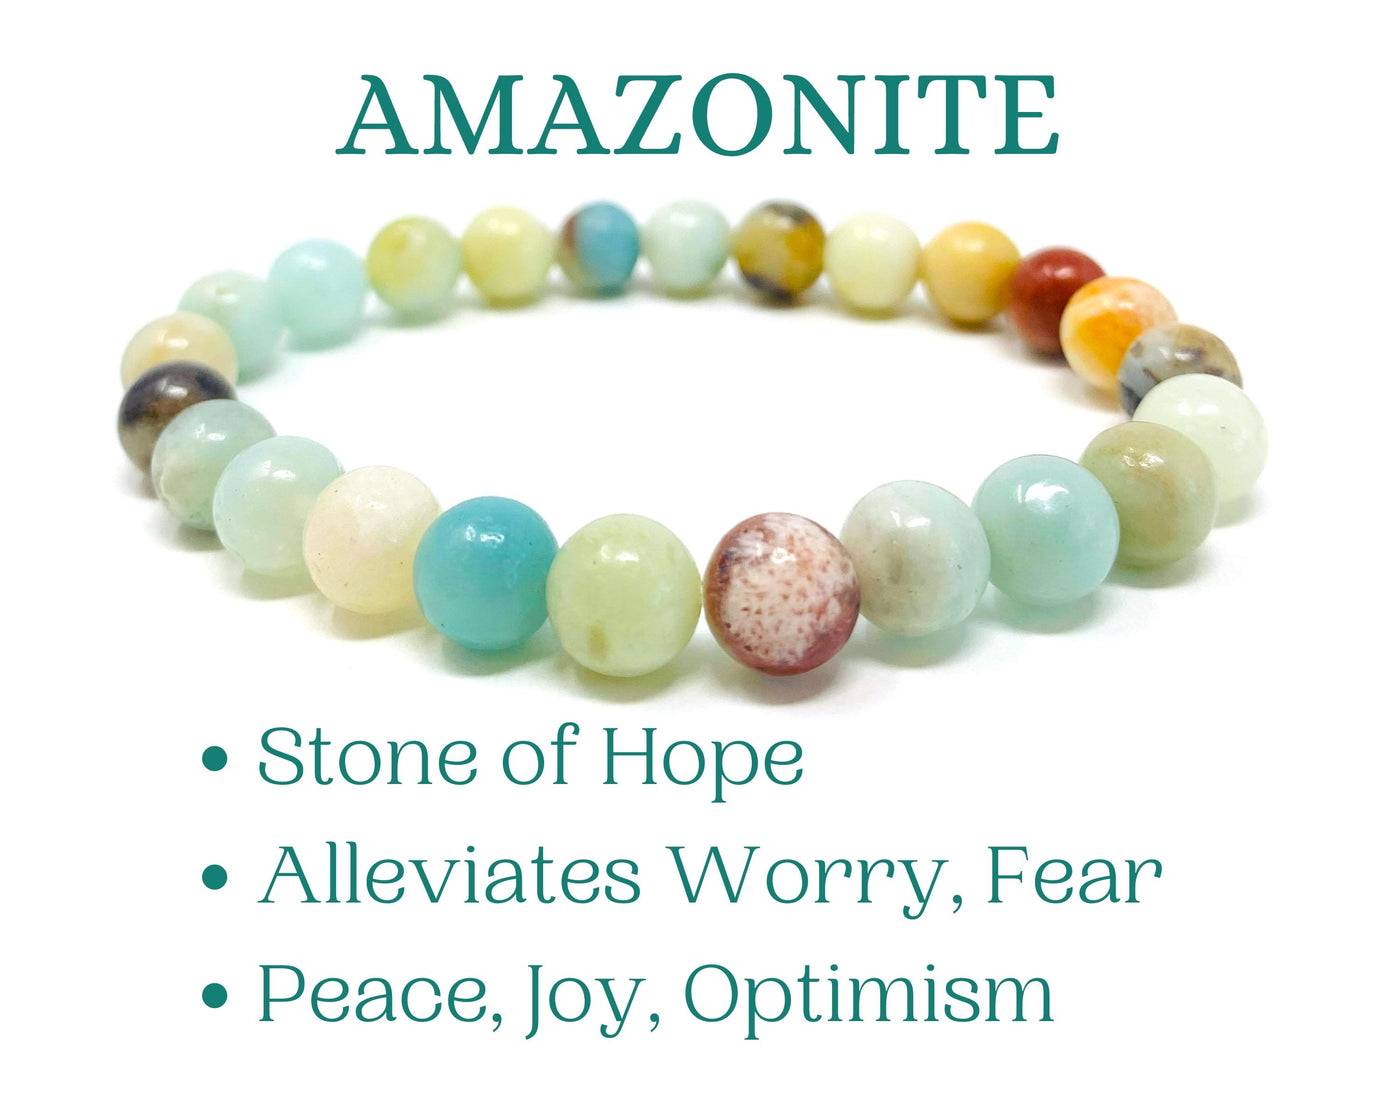 Amazonite Crystal Bracelet Healing Benefits, Meanings, Metaphysical Properties | Crystal for Hope, Worry, Fear, Peace, Joy, Optimism